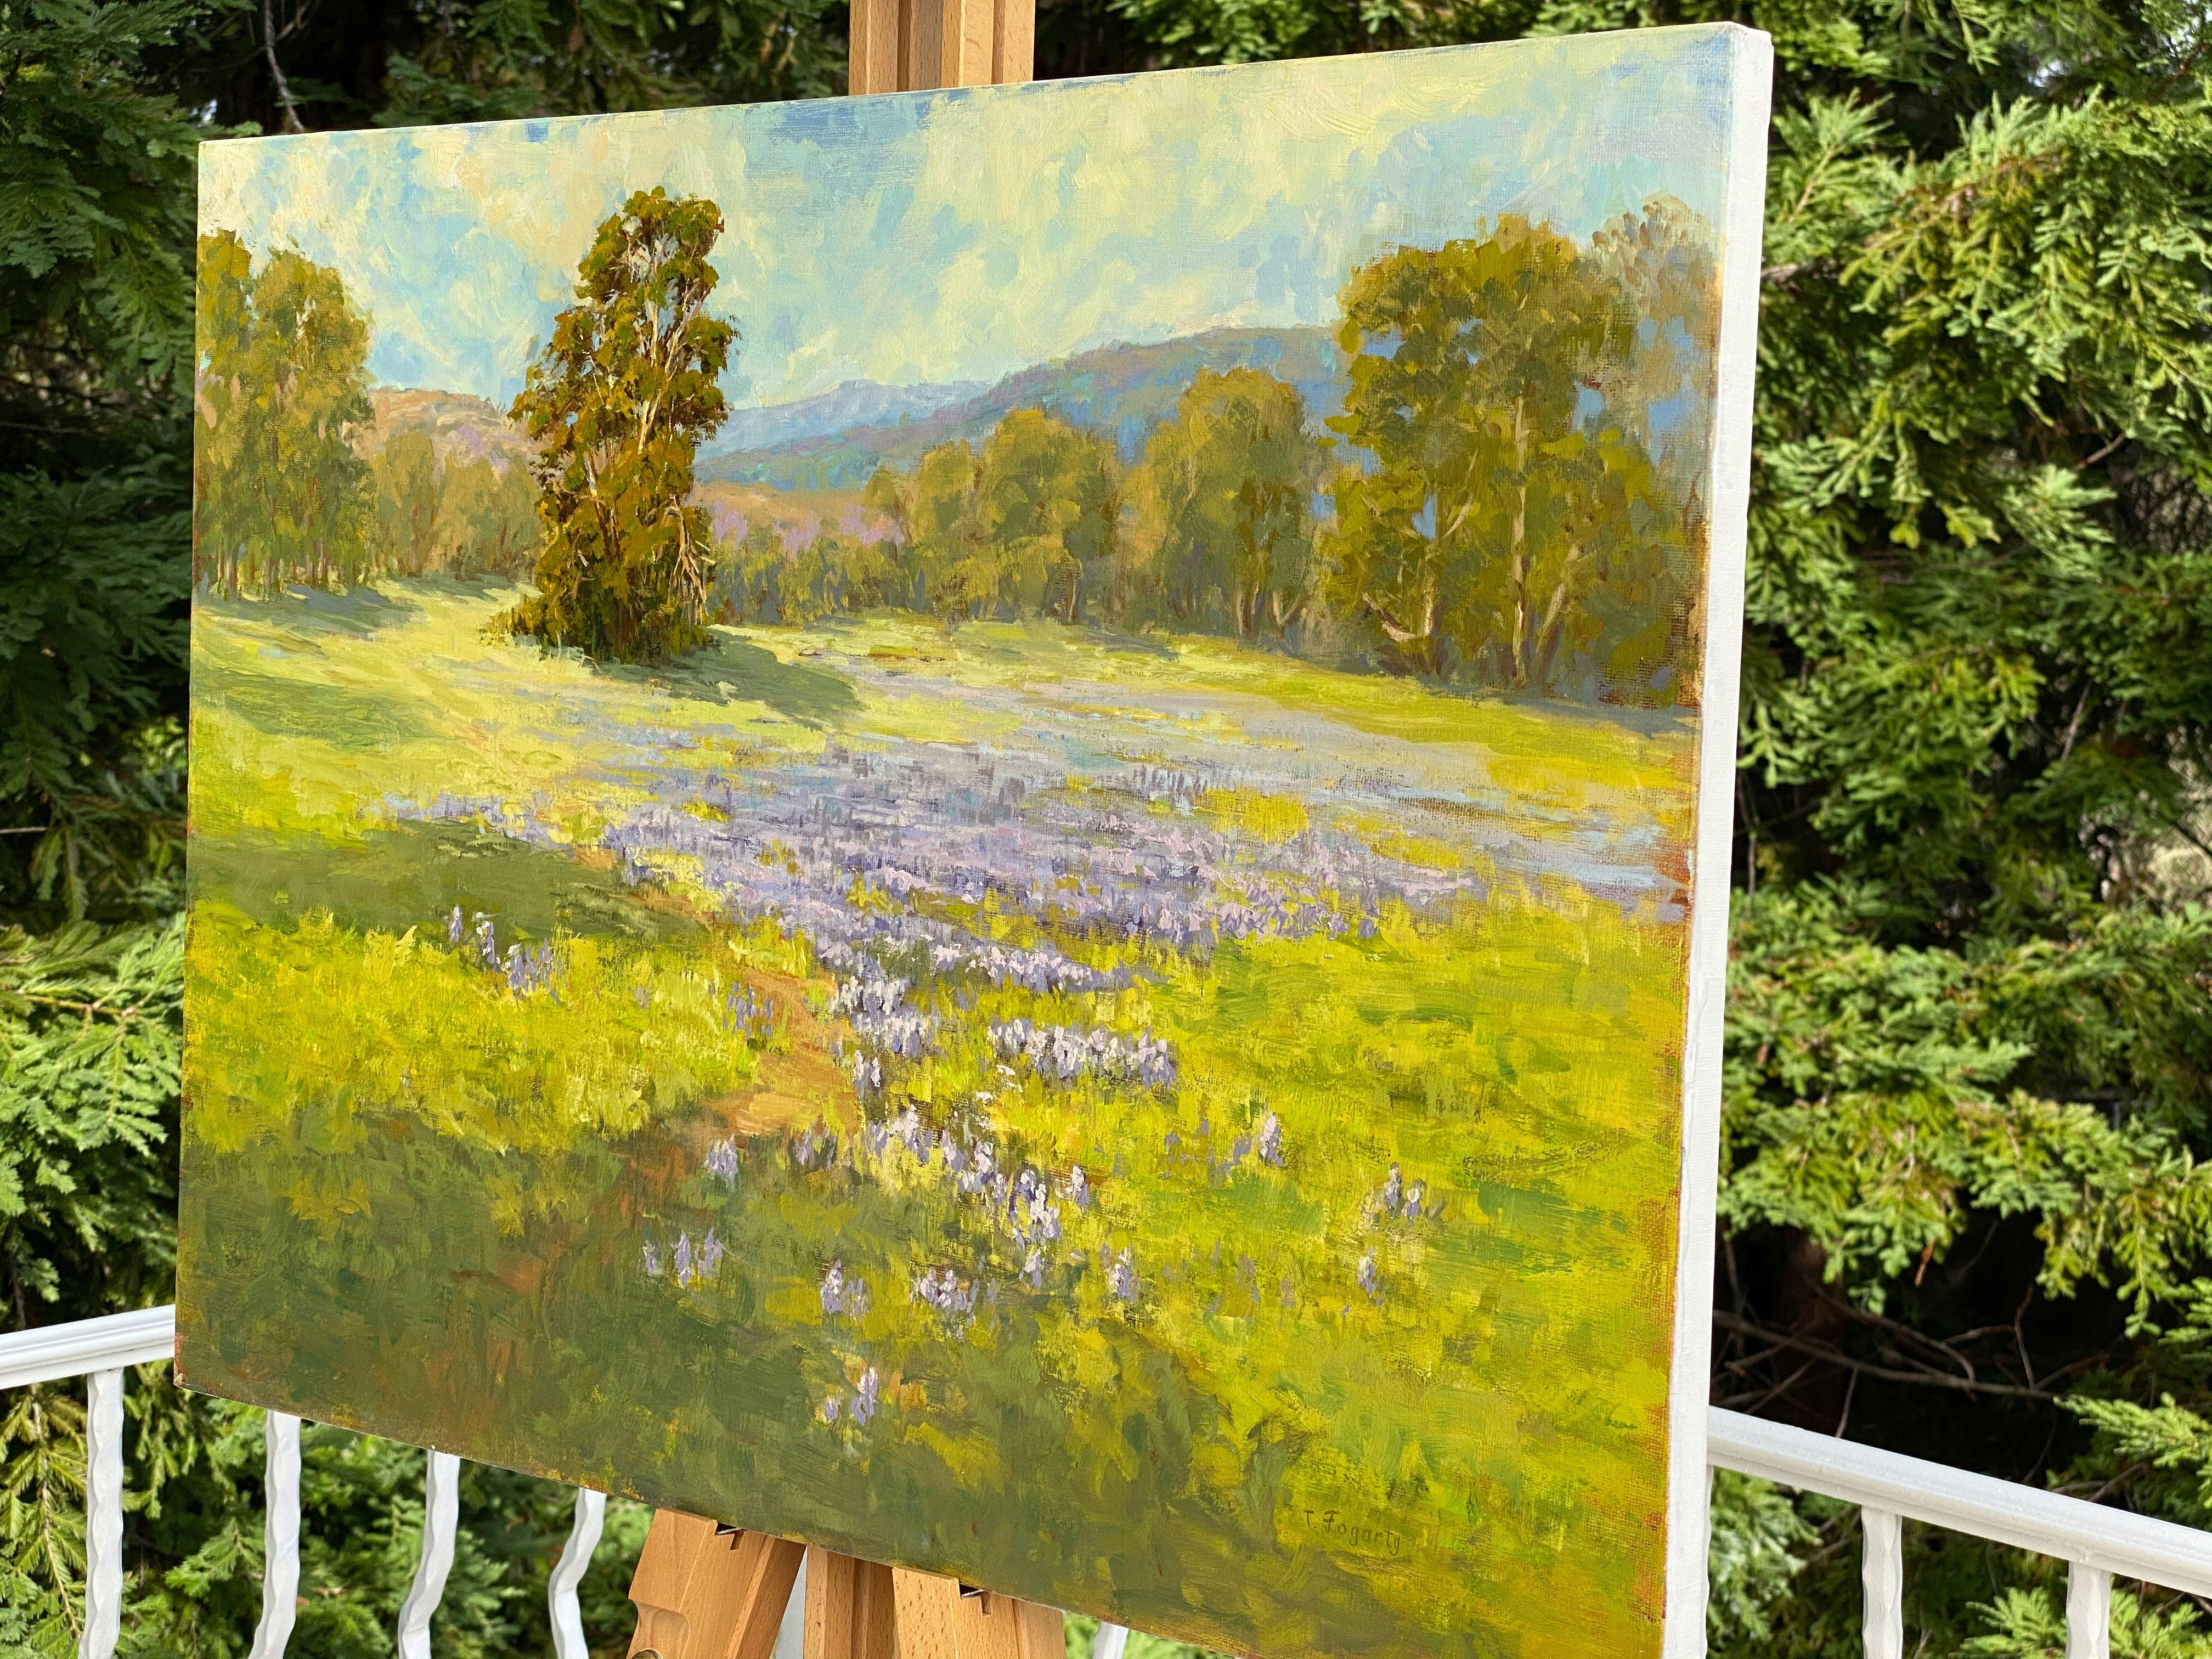 From the California hills to the coast of Maine, Lupine is one of America's largest and most famous flower groups, both in the wild and in gardens. This studio painting is based on my plein air (painted on location) study. I was inspired by the